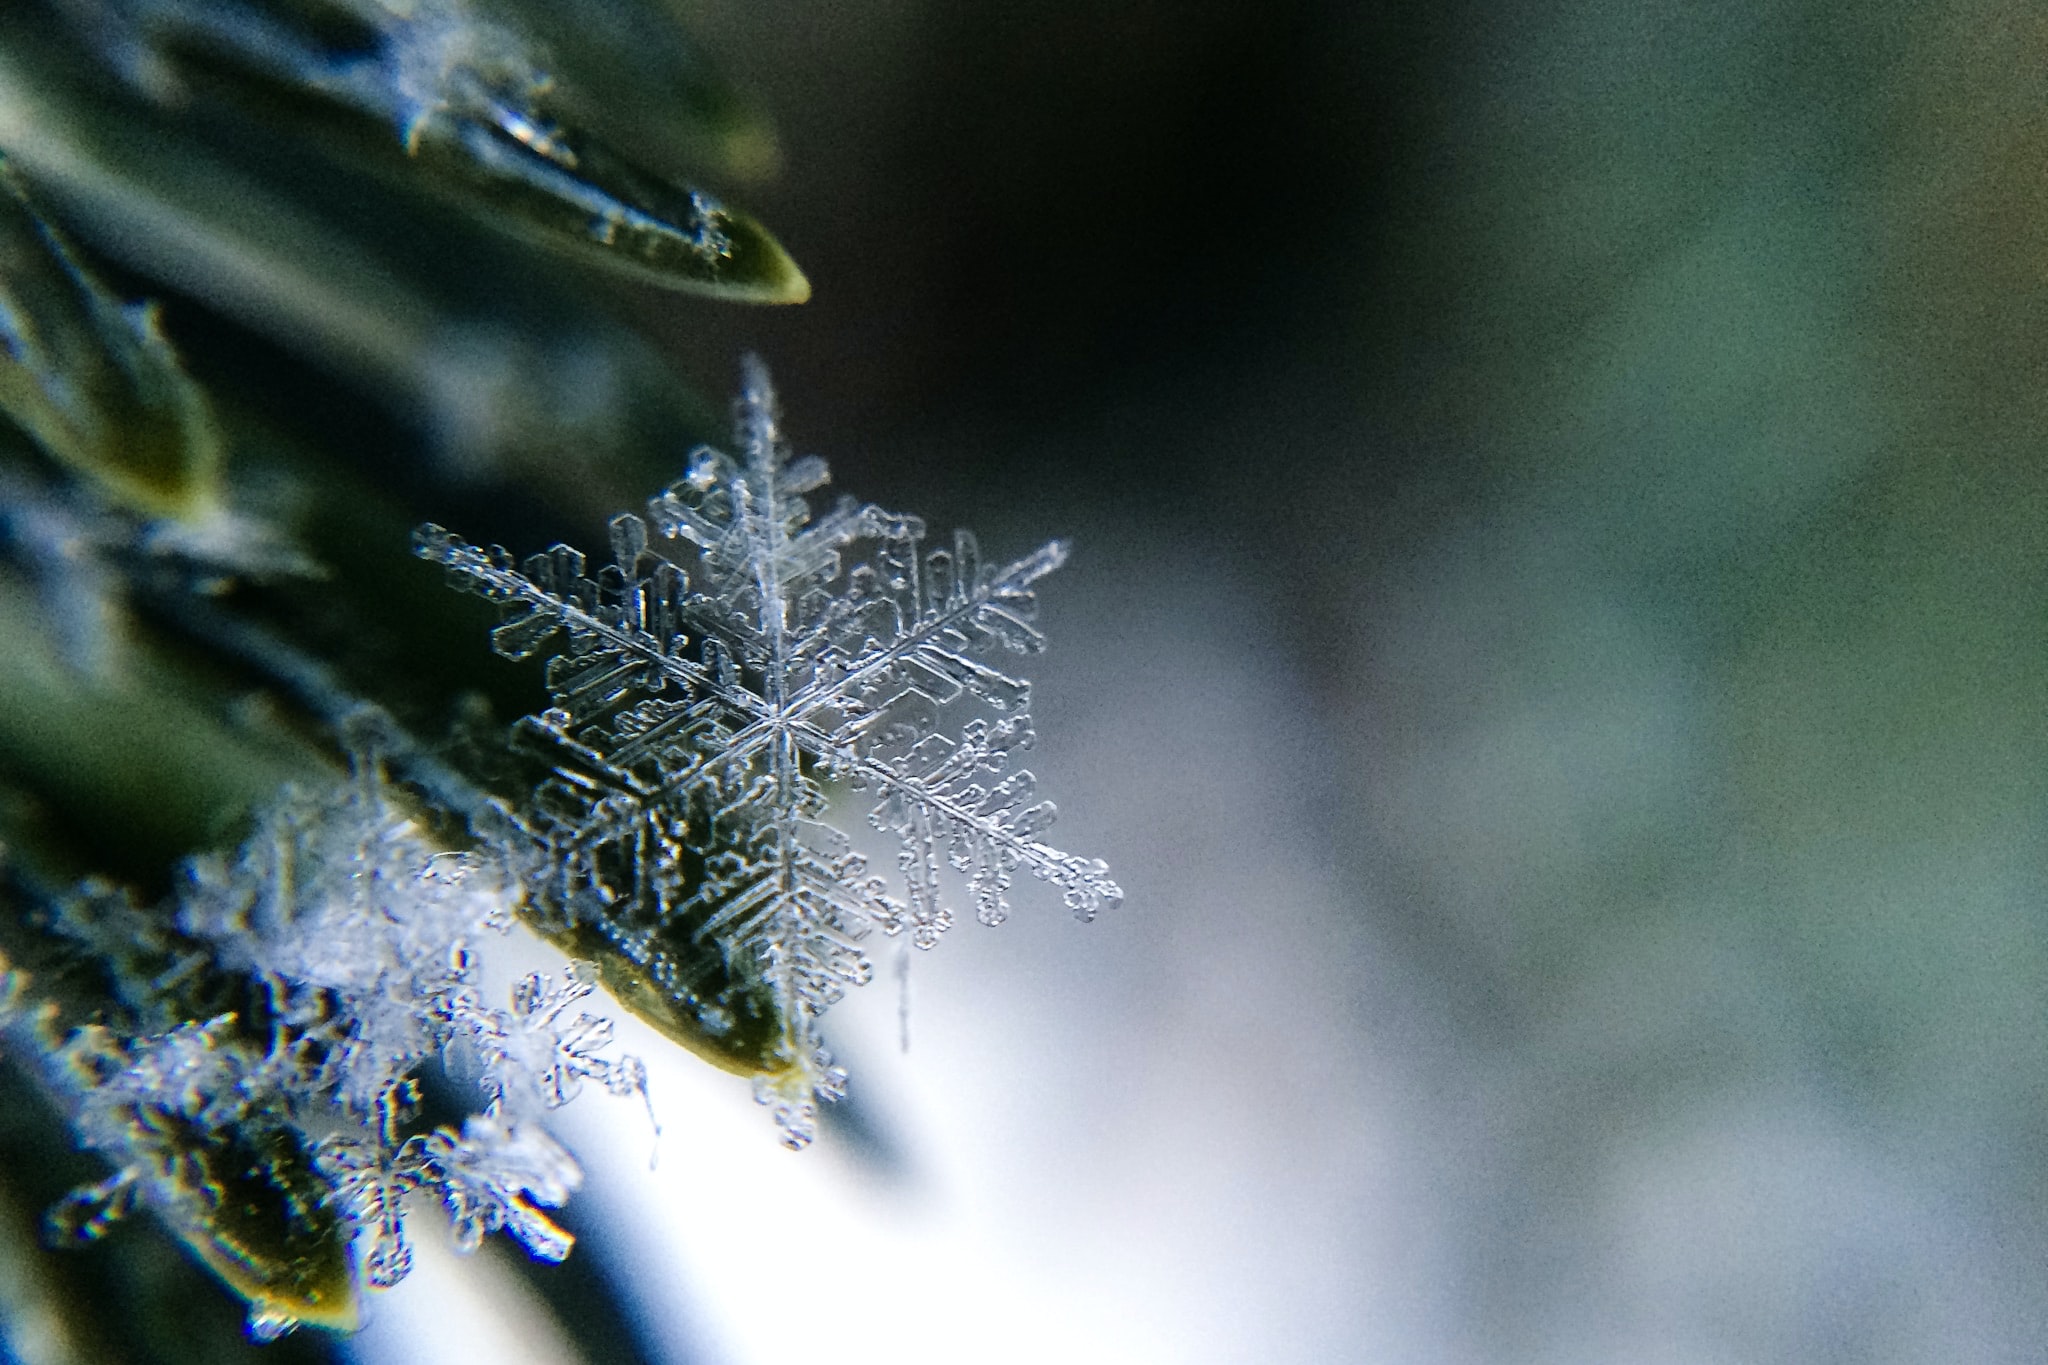 A close up photograph of a snowflake.